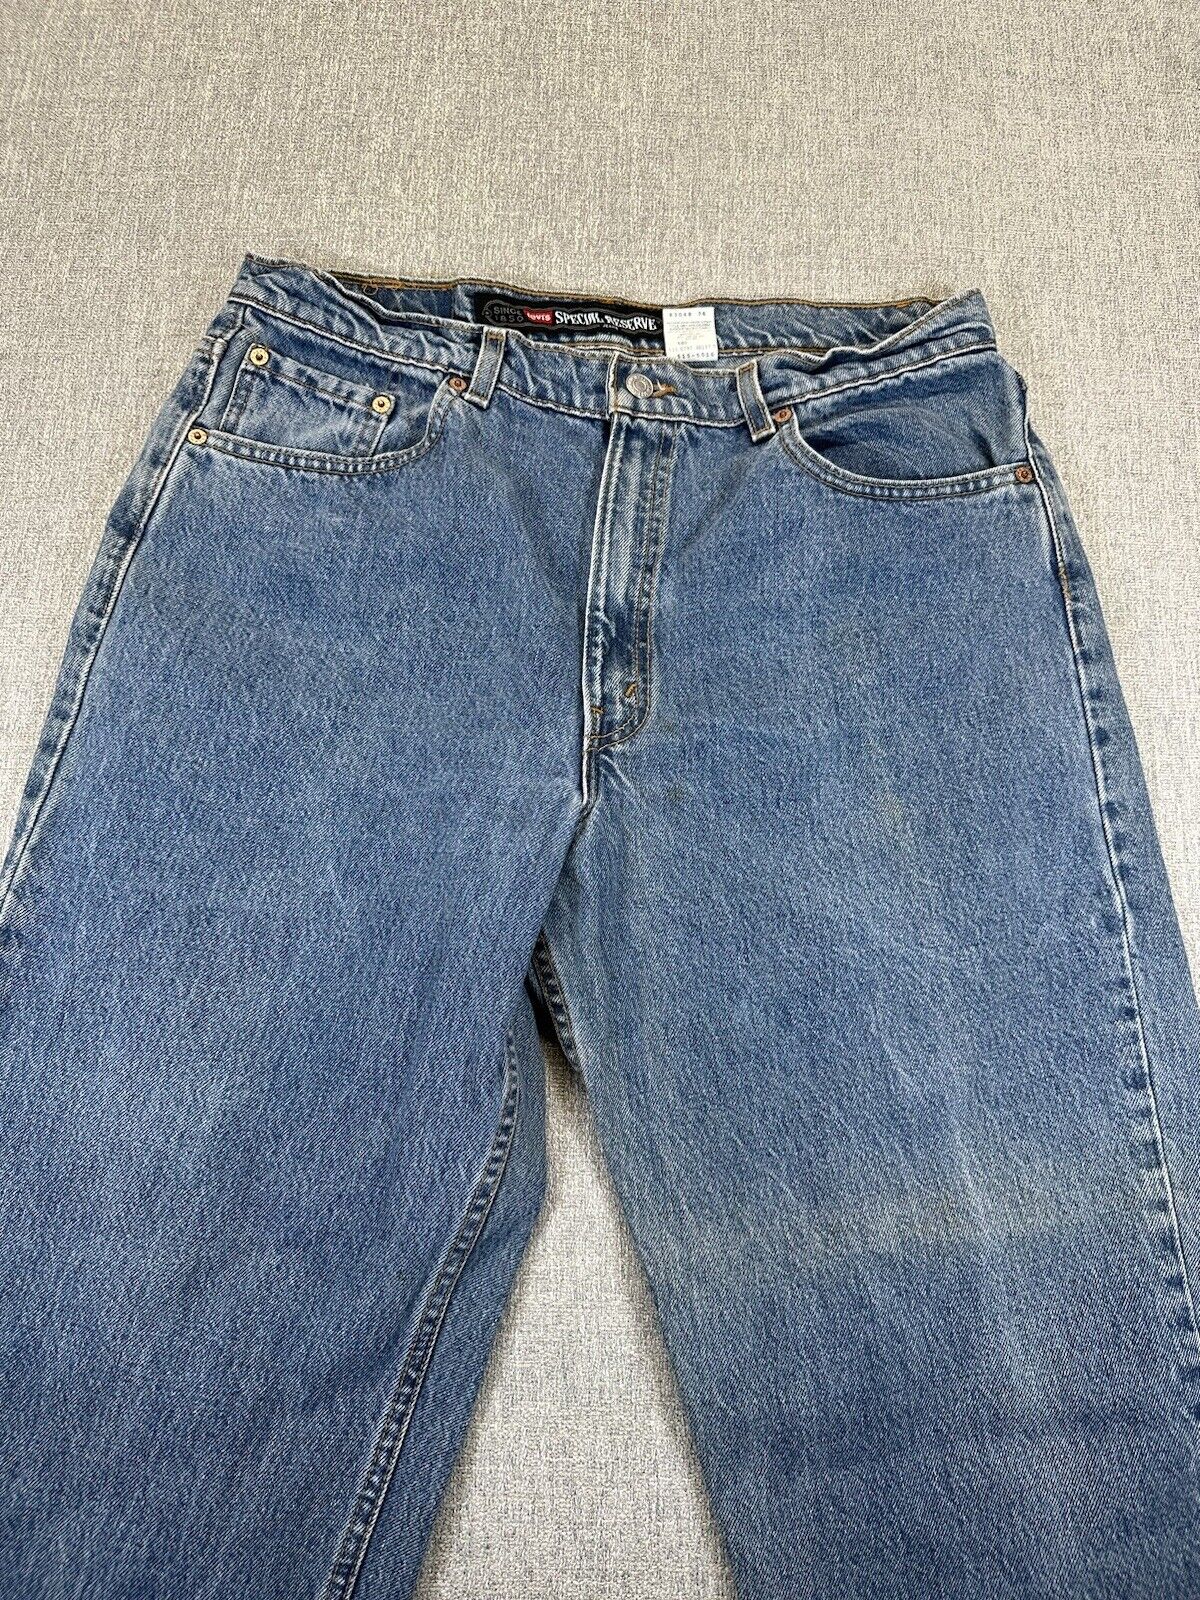 Vintage Levis 515 Special Reserve Jeans Mens 38x30 Relaxed Fit USA